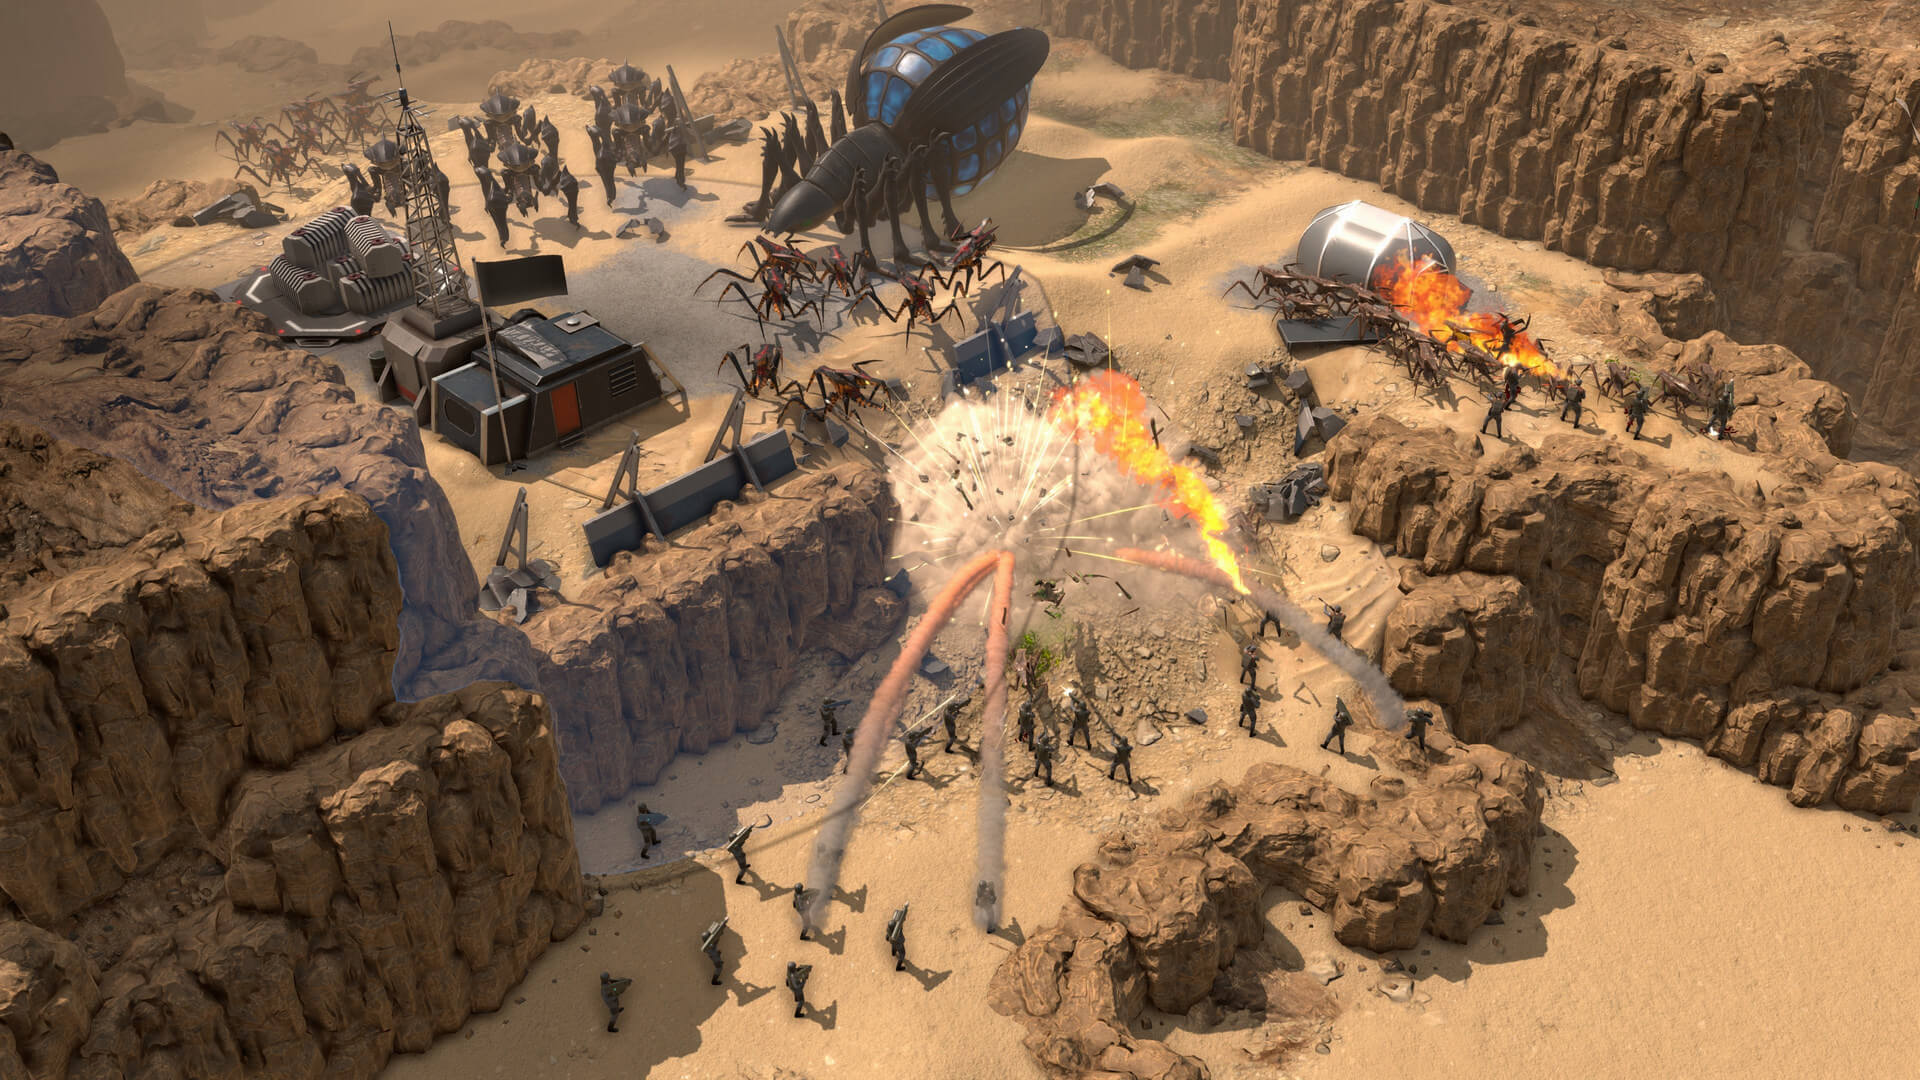 new-gameplay-trailer-released-for-starship-troopers-terran-command